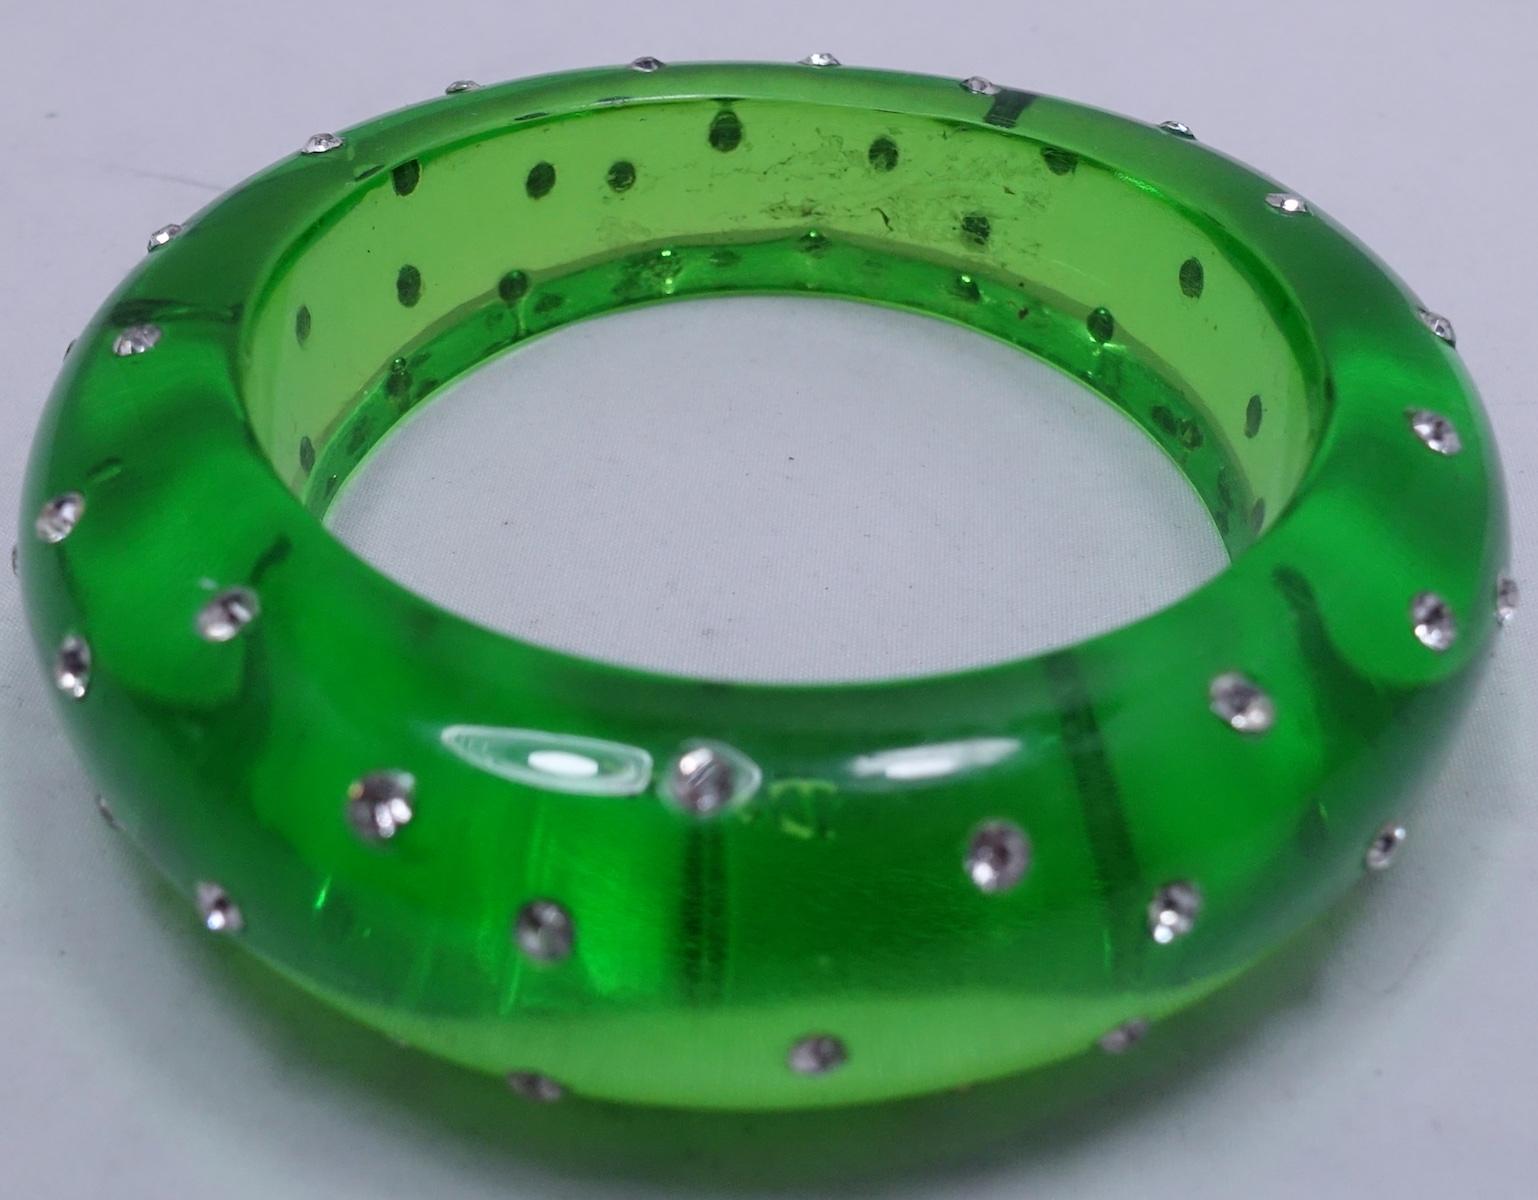 This signed Dereon vintage bracelet features green Lucite with clear crystal accents.  In excellent condition, this bracelet measures 8” around the inside x 3/4” wide and is signed “Dereon”.